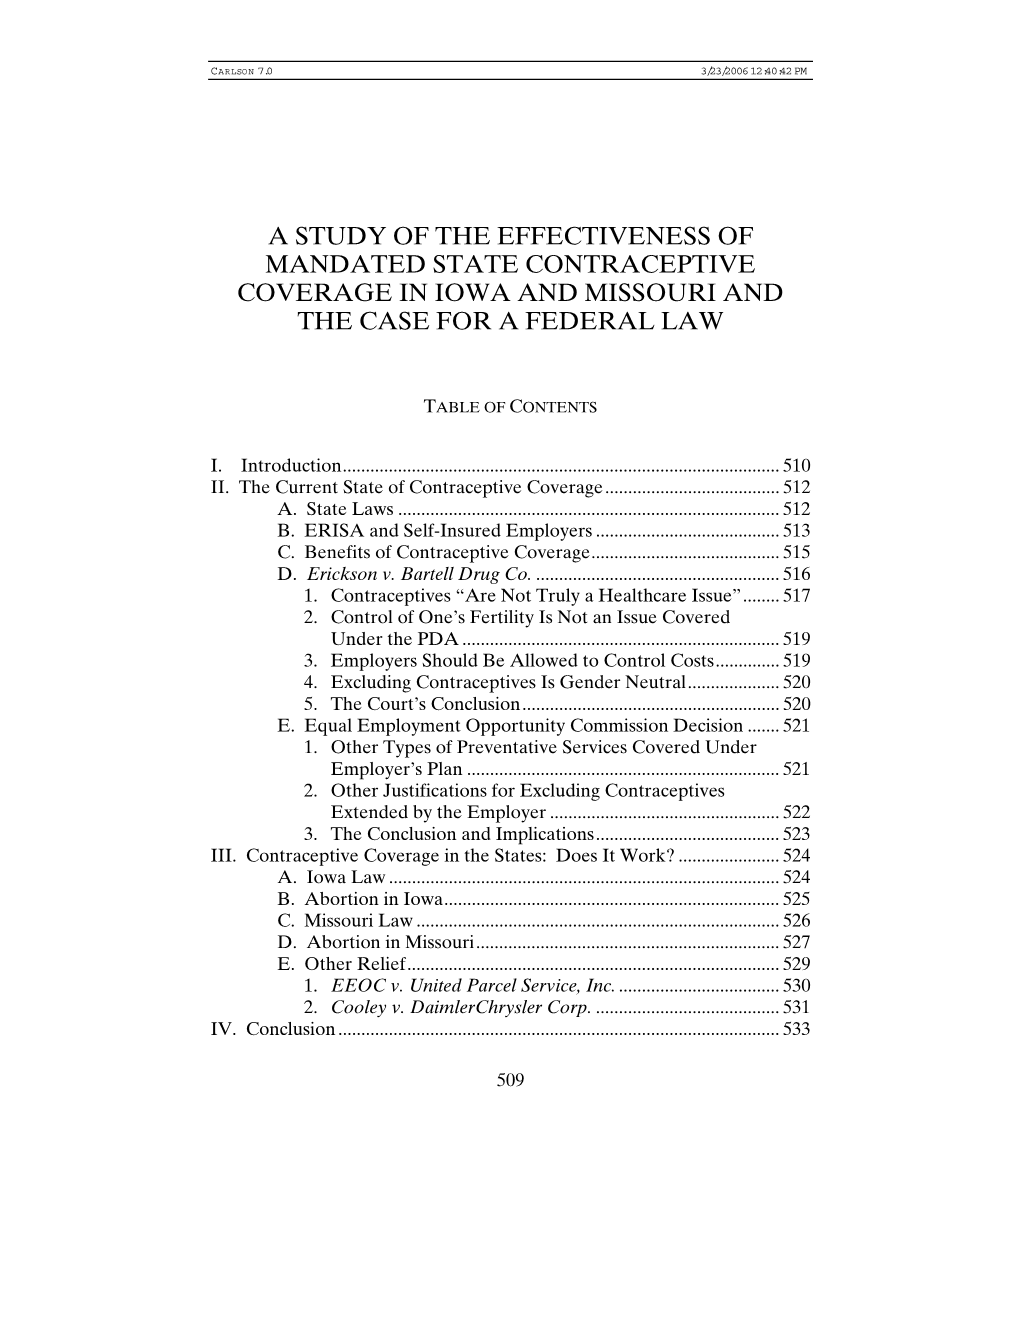 A Study of the Effectiveness of Mandated State Contraceptive Coverage in Iowa and Missouri and the Case for a Federal Law